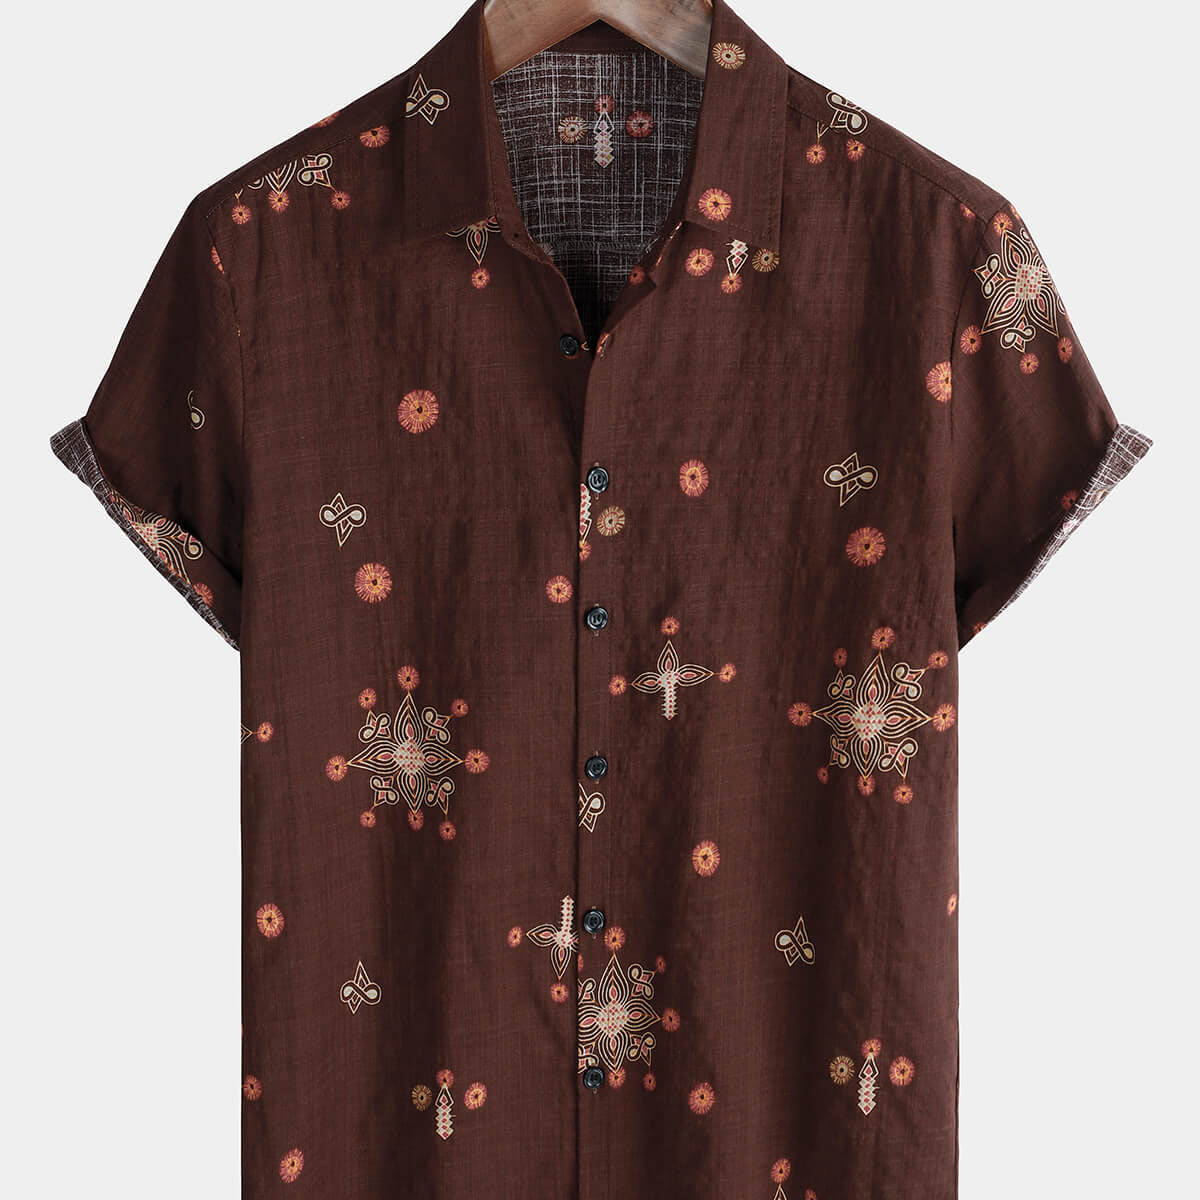 Men's Retro Button Up Holiday Brown Short Sleeve Shirt